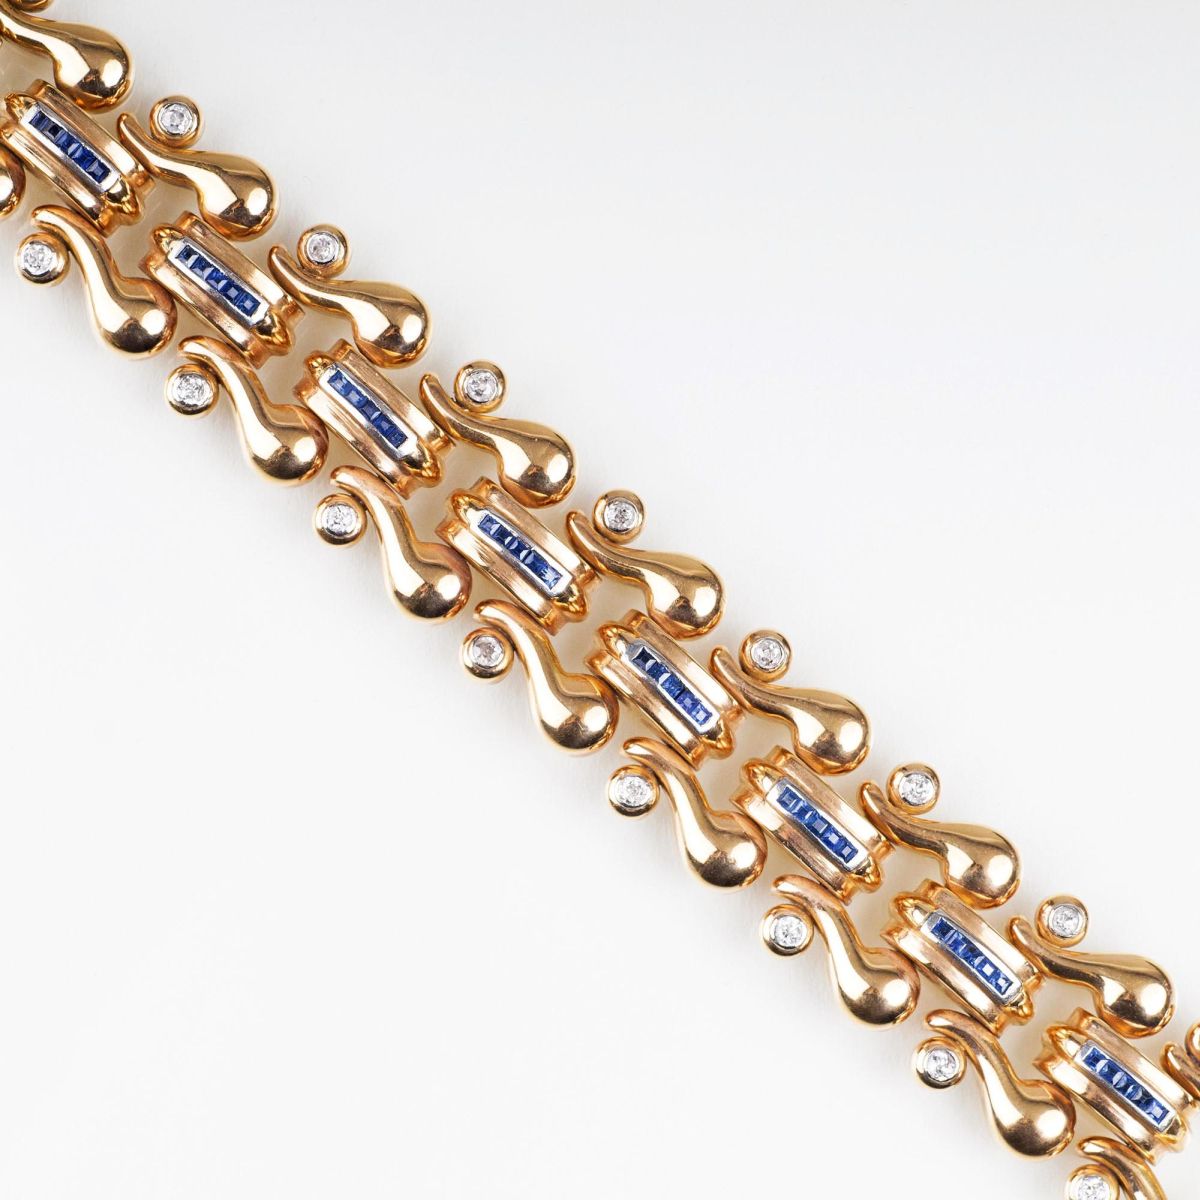 An Art-déco Gold Bracelet with sapphires and Diamonds - image 2